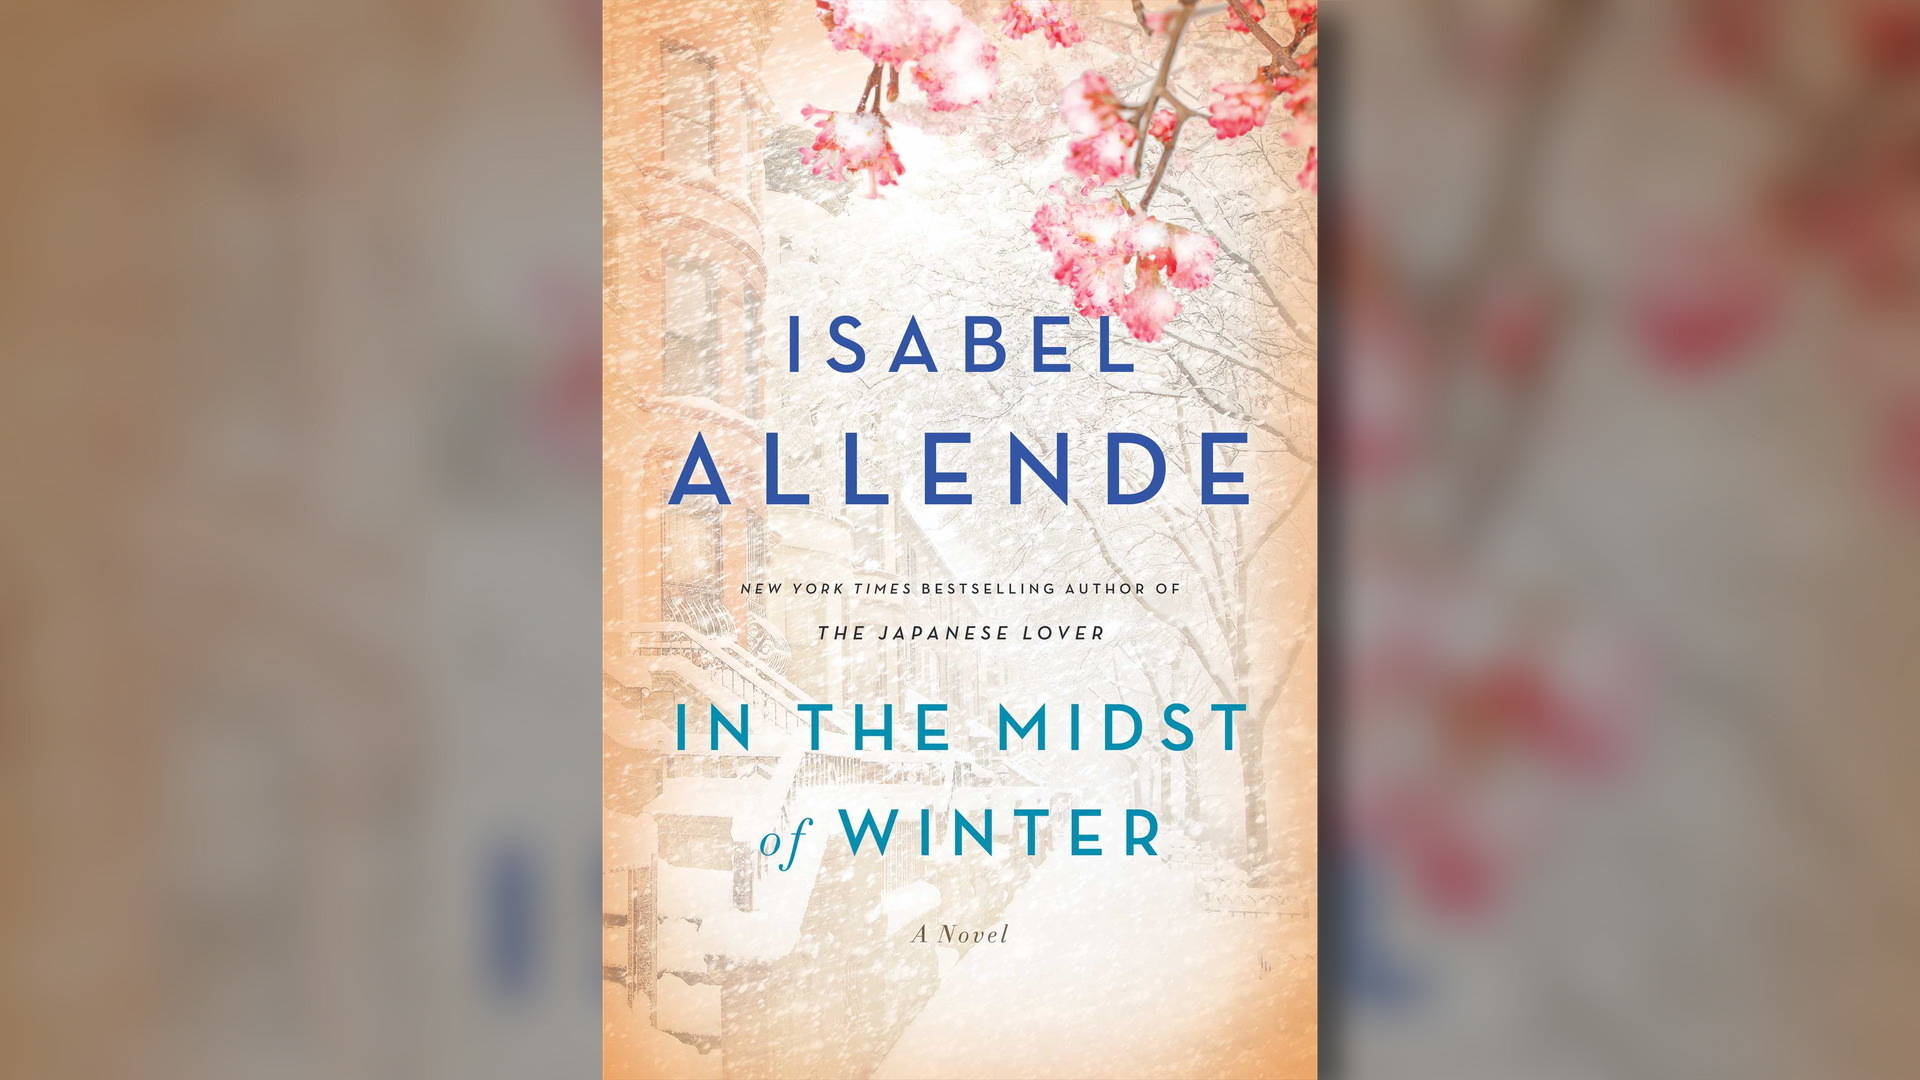 in the midst of winter by isabel allende